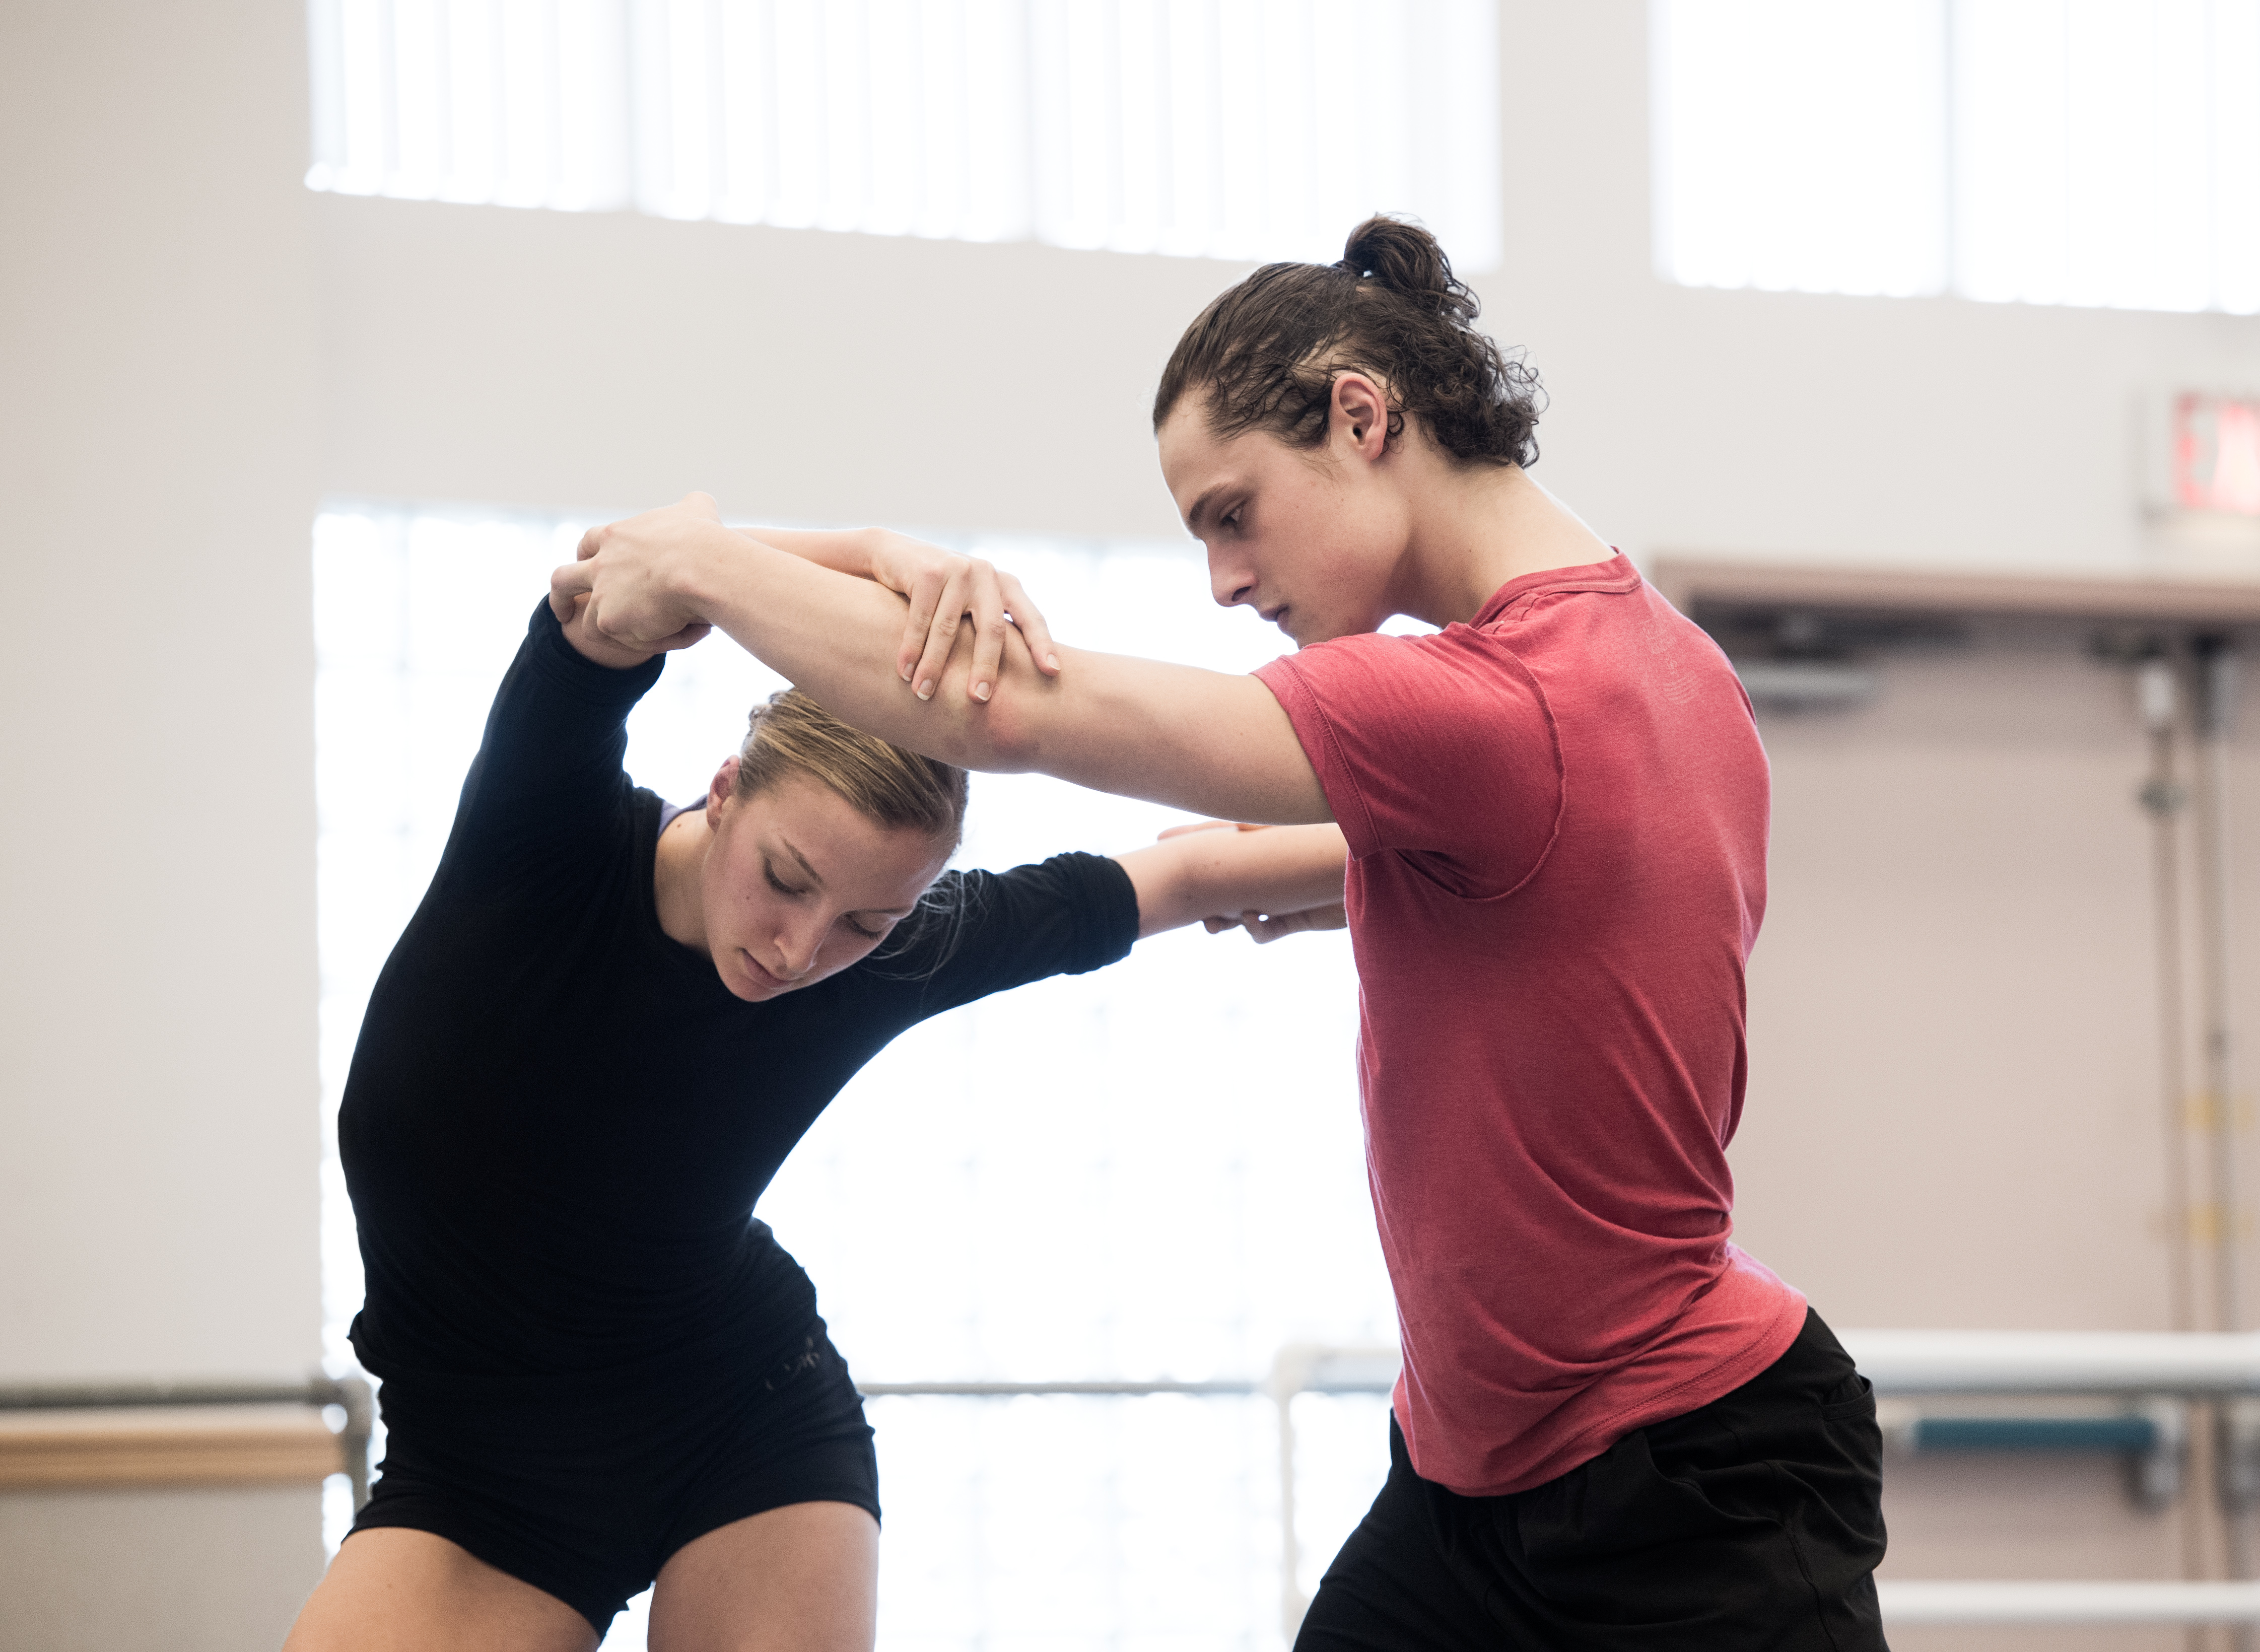 Kimberley de Jong (Compagnie Marie Chouinard) spent the first week of 2016 with the AUDC dancers setting Marie Chouinard's 'bODY_rEMIX/les_vARIATIONS_gOLDBERG'. Photos: David Cooper